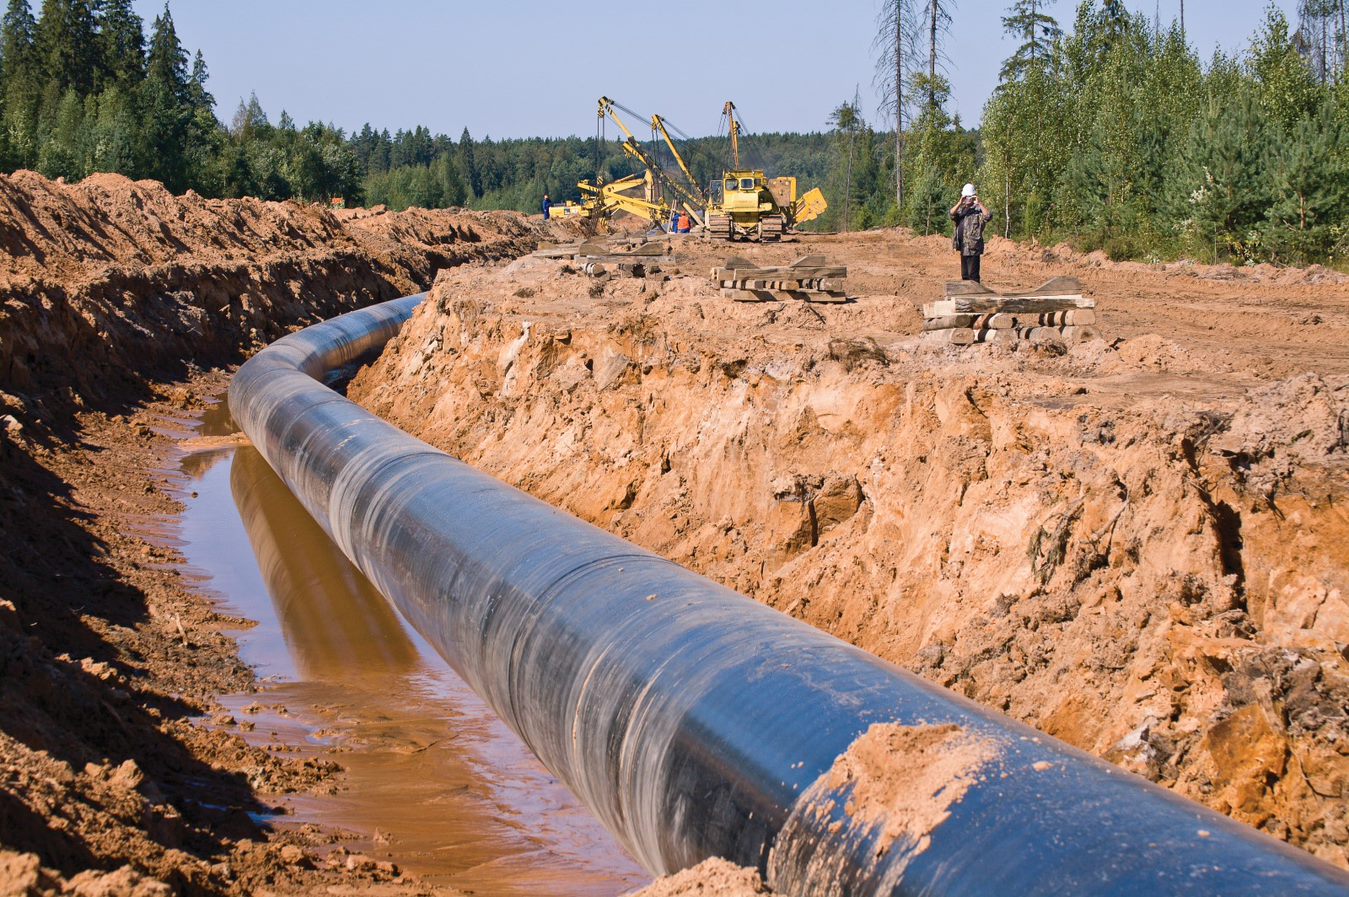 Pipeline in muddy trench with workers and heavy duty construction equipment in background.